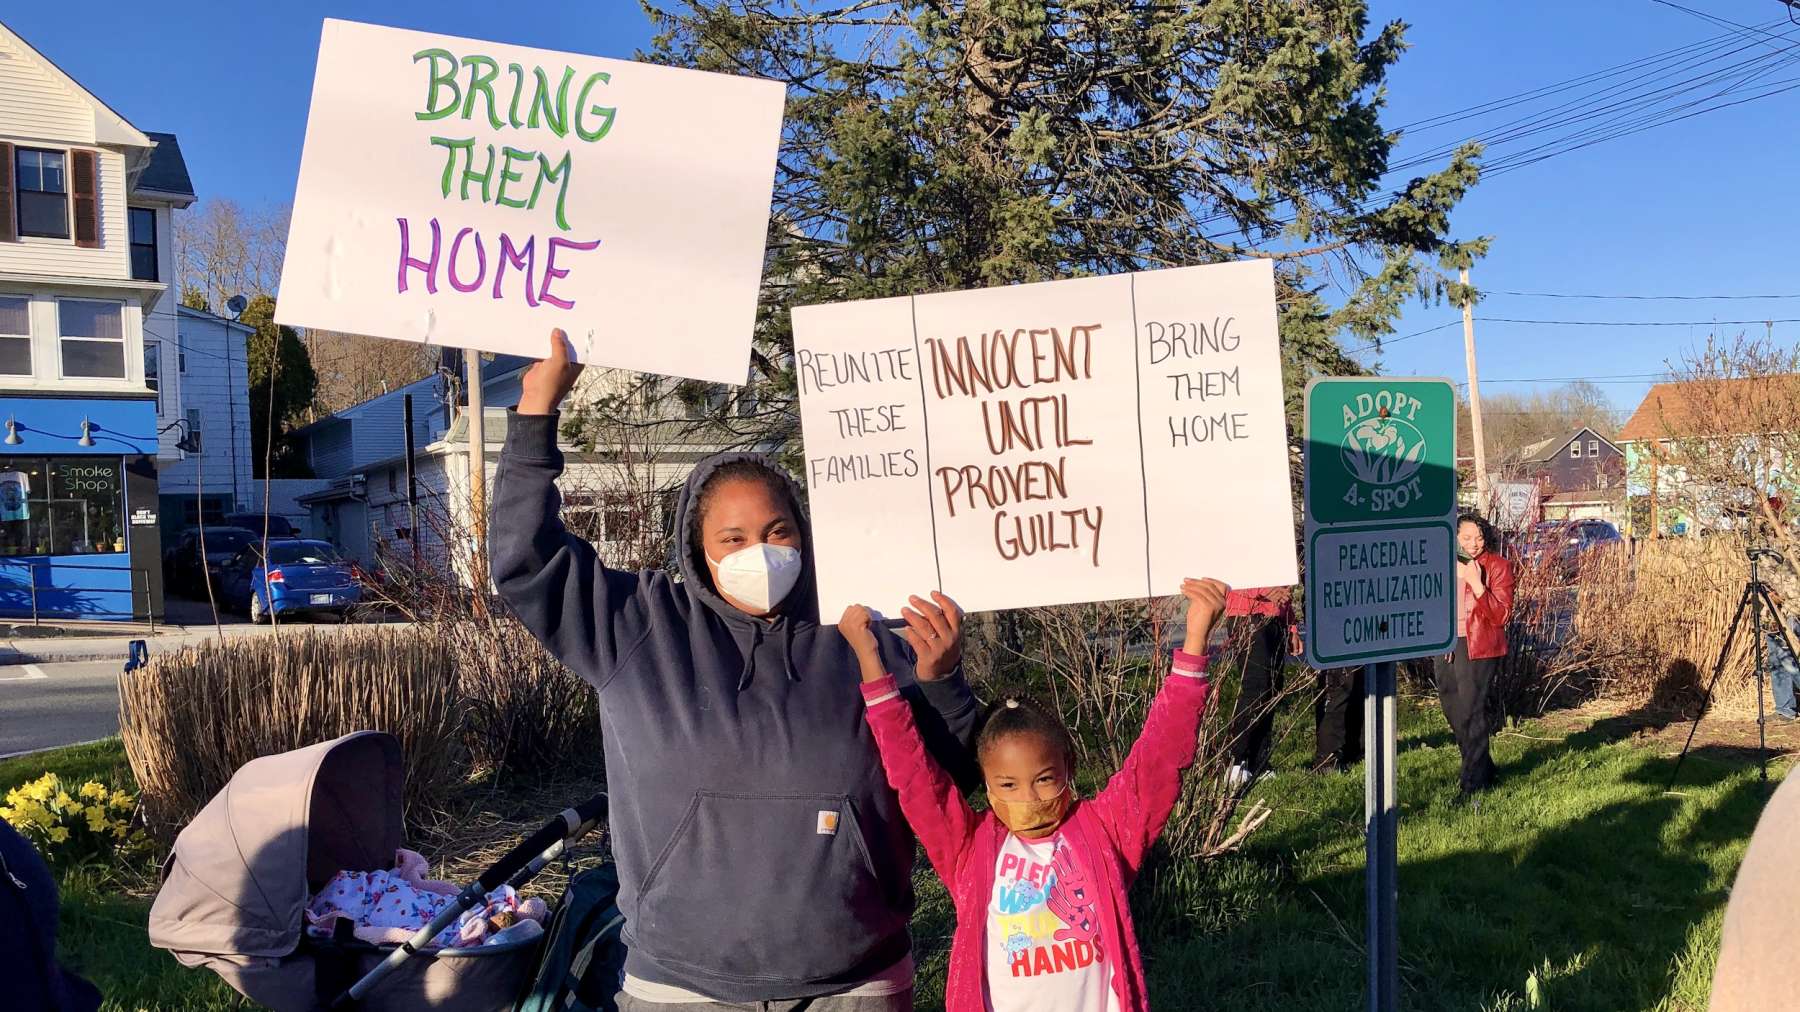 Rhode Island News: South Kingstown rallies for justice in the wake of arrests